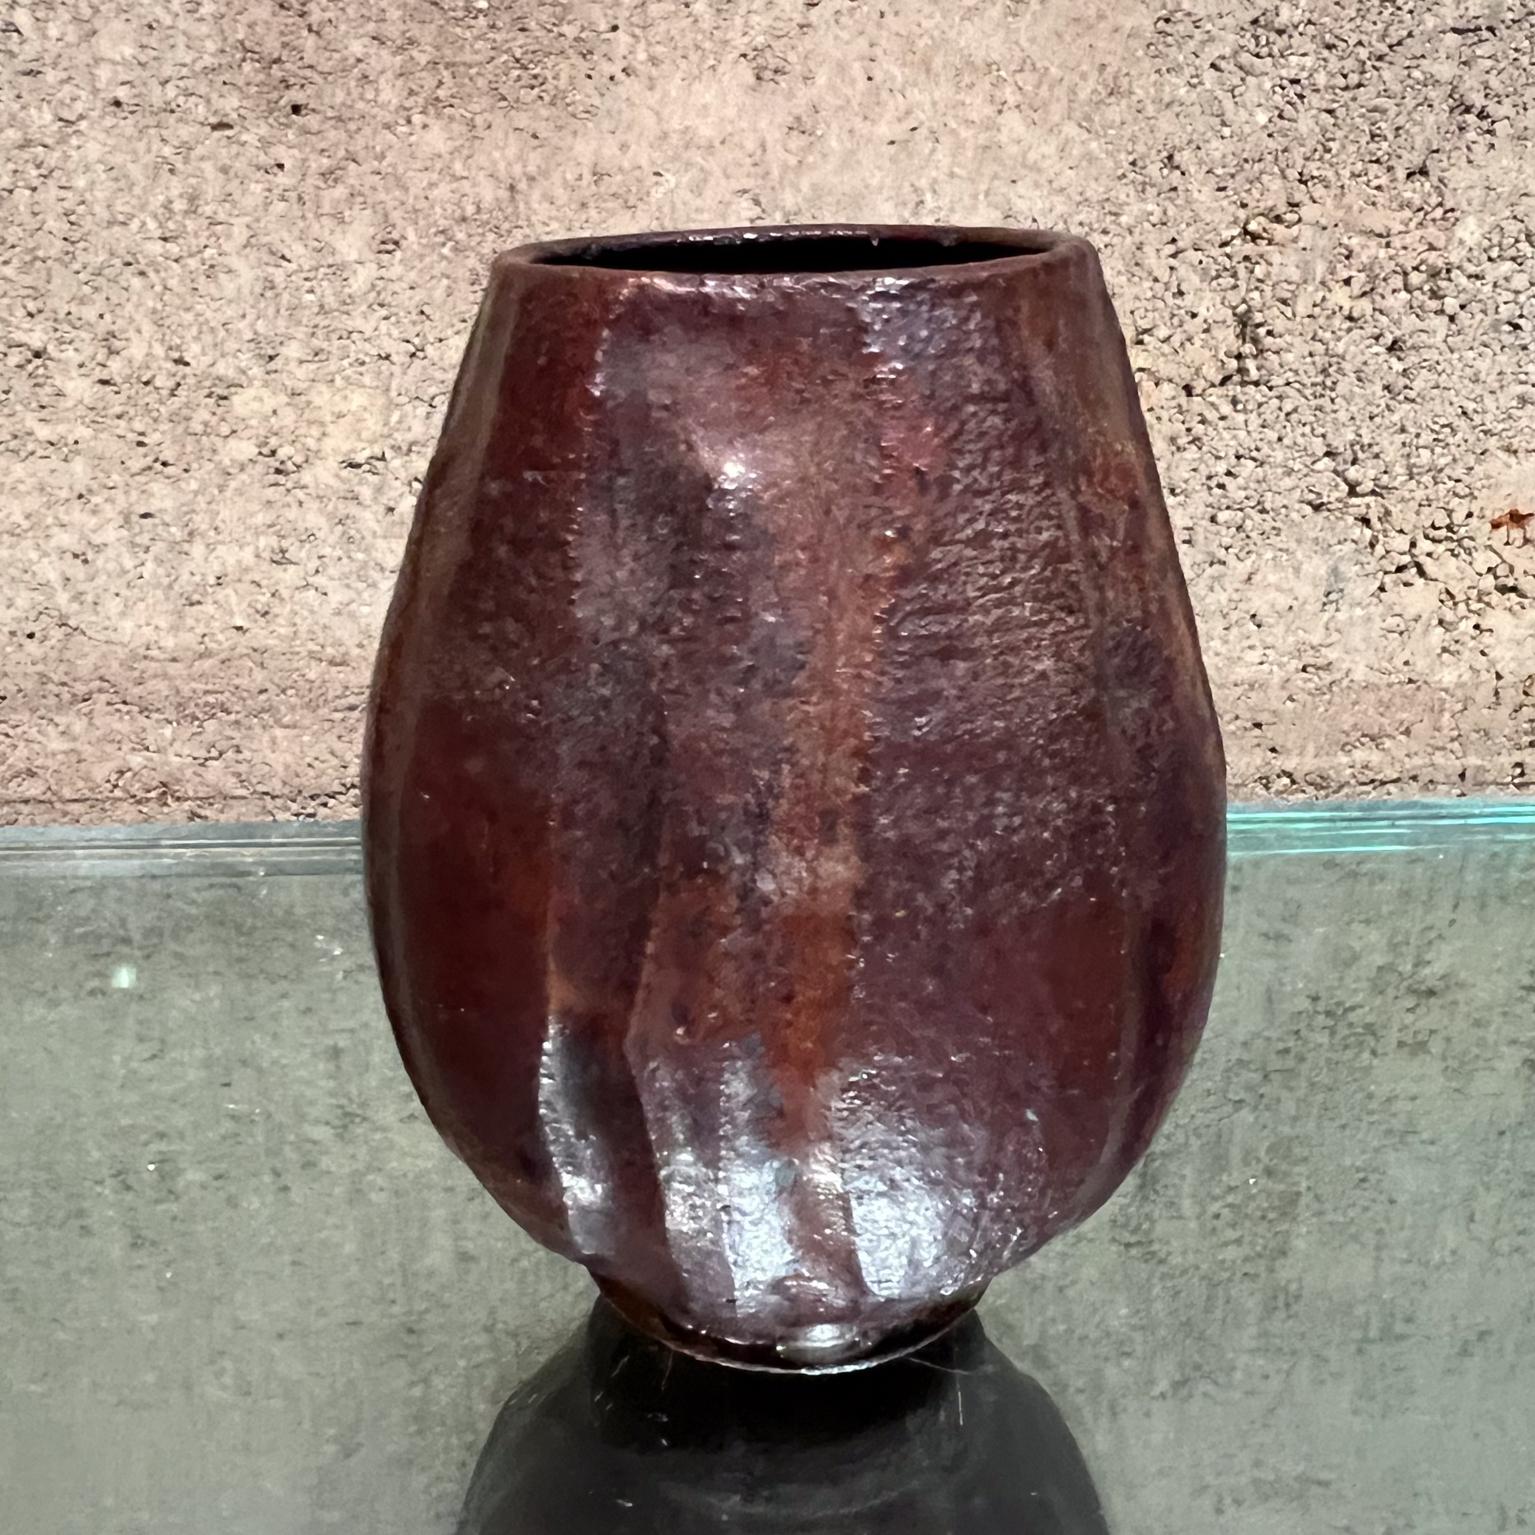 Midcentury Art Pottery Stoneware Vase Architectural Art California
style of David Cressy or Robert Maxwell.
Small vase in Brown
signed Corral 59
4.5 h x 4 diameter
Original vintage condition
Refer to images.